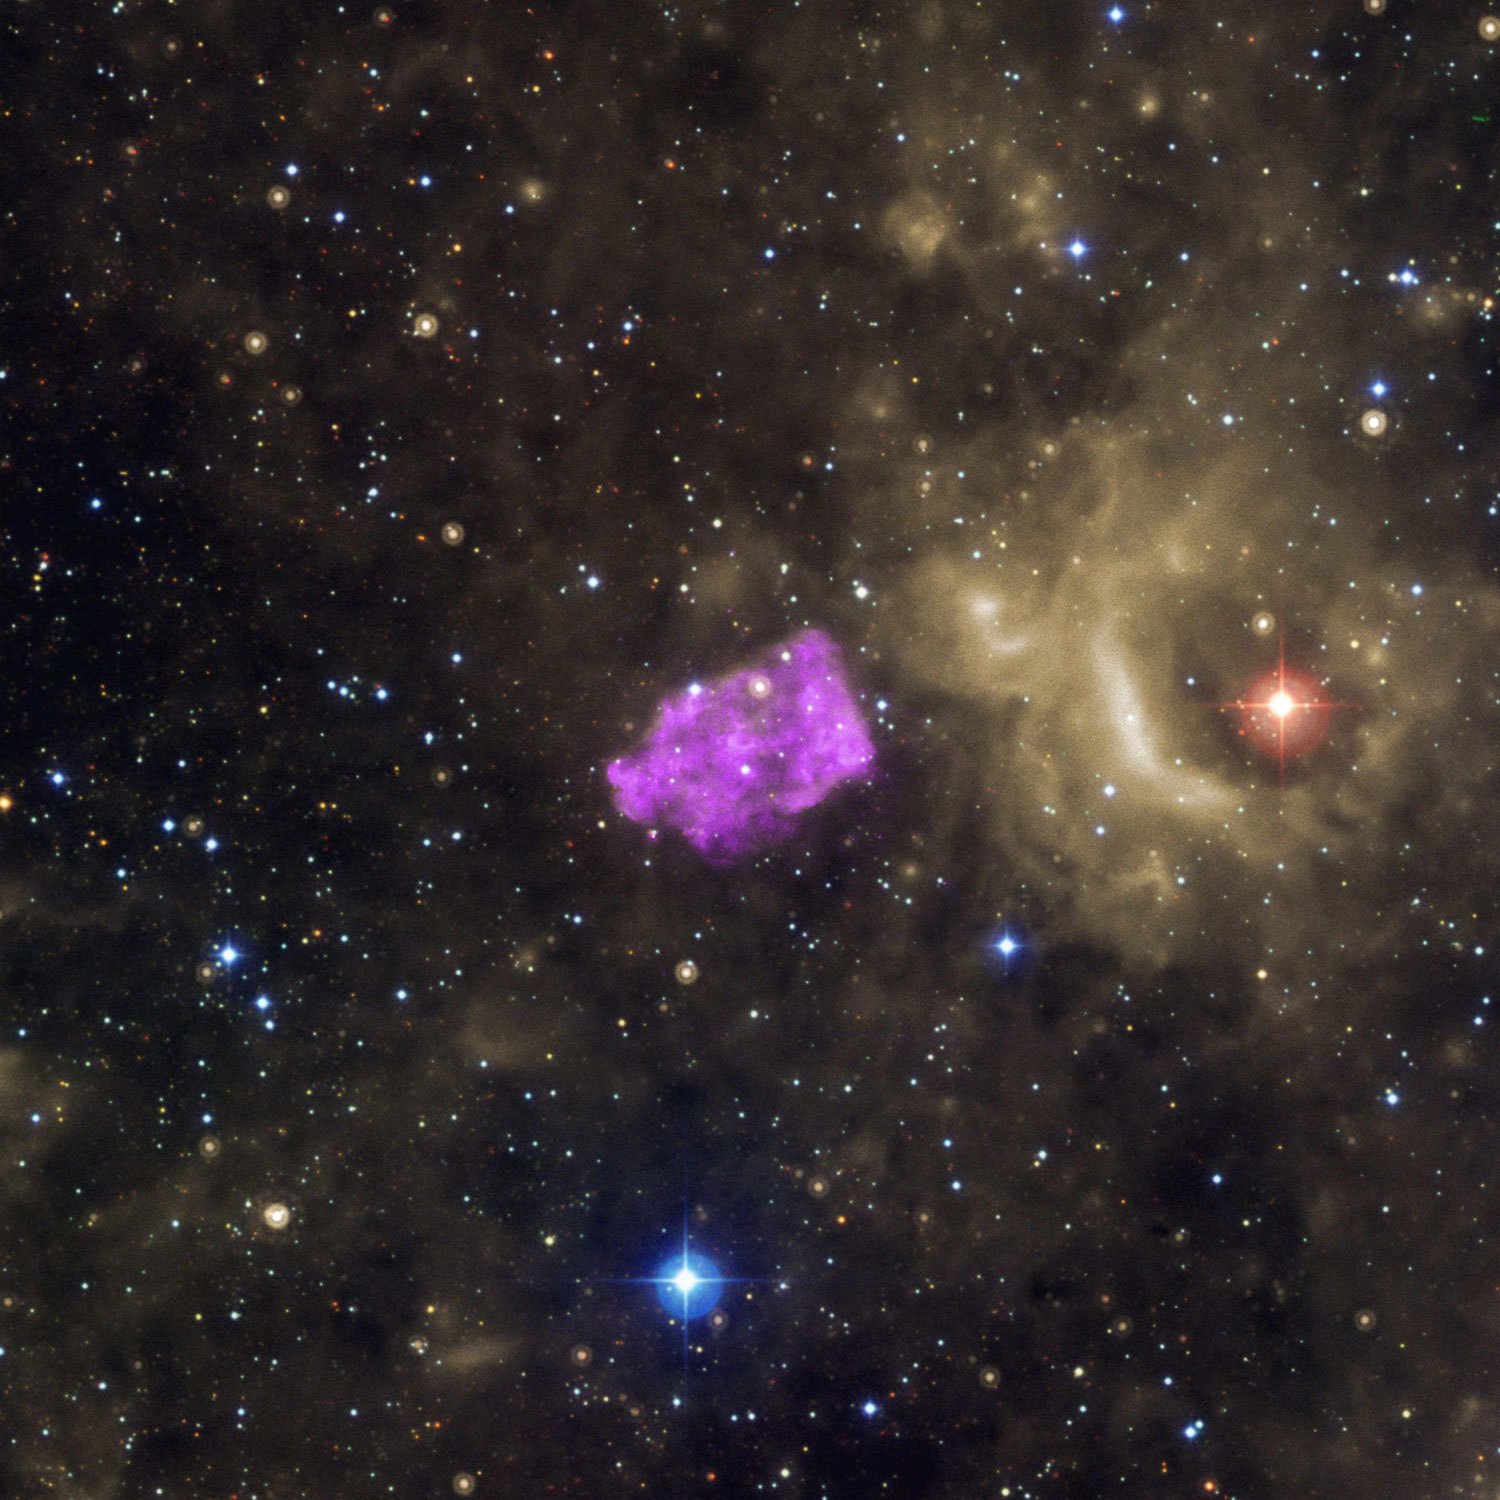 The Galactic supernova remnant 3C 397 in an image released on Nov. 6, 2013. Researchers think the formation's box-like appearance is produced as the heated remains of the exploded star—detected here by the Chandra x-ray observatory—run into cooler gas surrounding it.